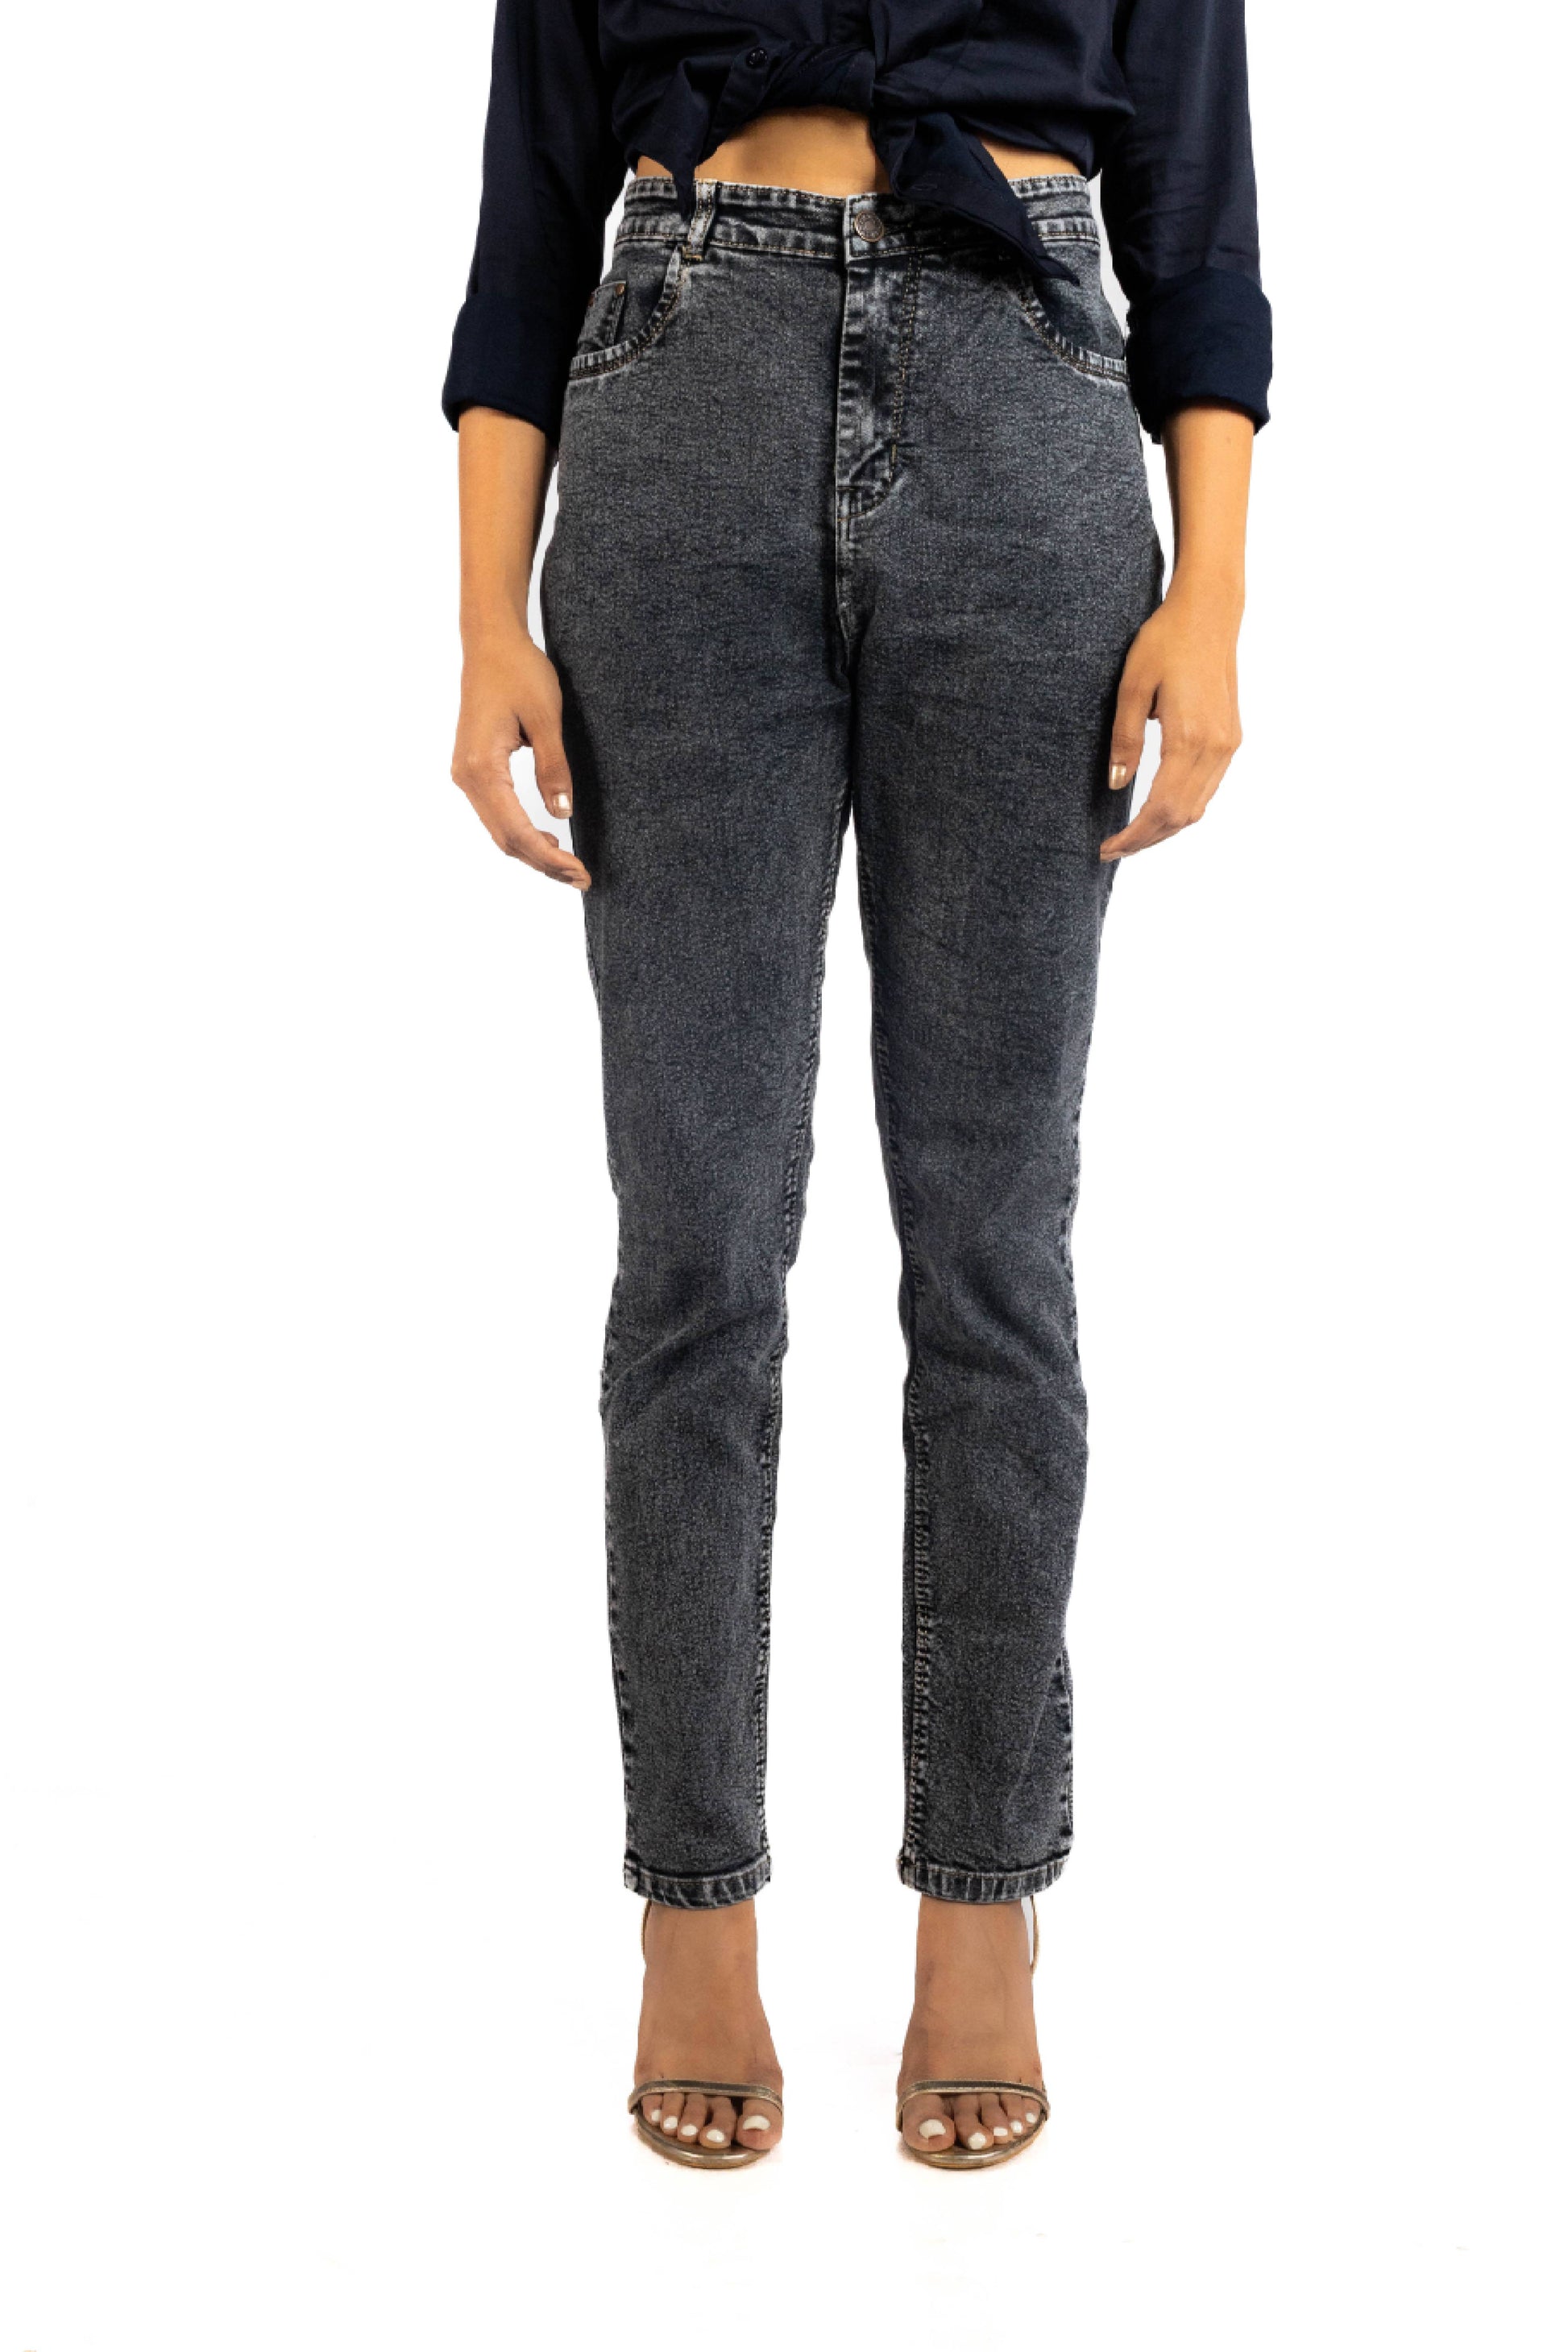  Explore Black Stretchable Denim Jeans for Women in the UAE